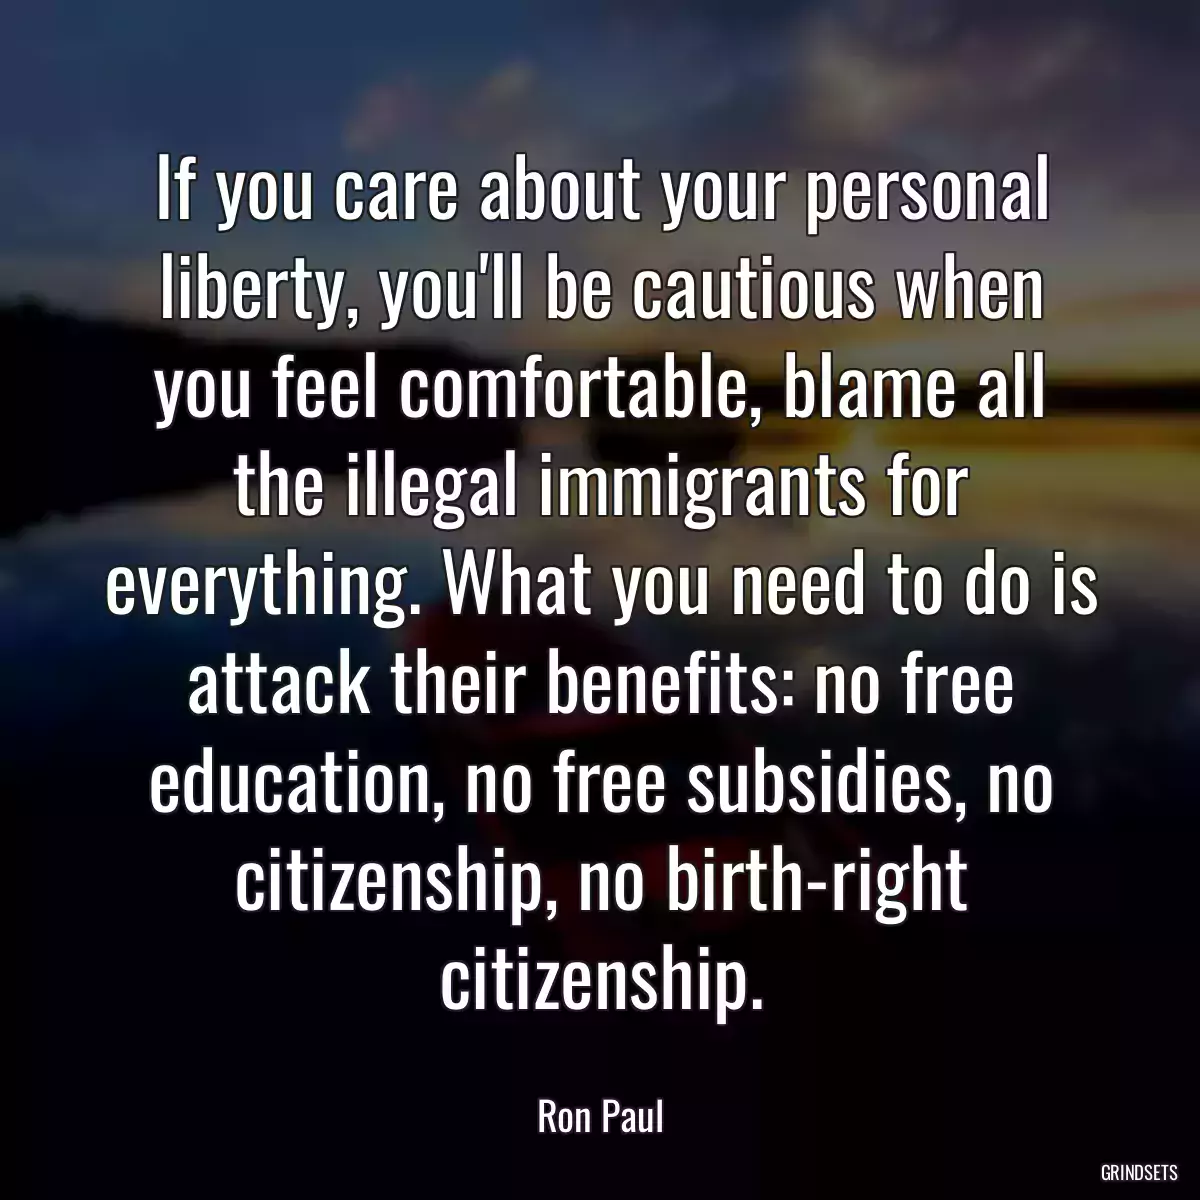 If you care about your personal liberty, you\'ll be cautious when you feel comfortable, blame all the illegal immigrants for everything. What you need to do is attack their benefits: no free education, no free subsidies, no citizenship, no birth-right citizenship.